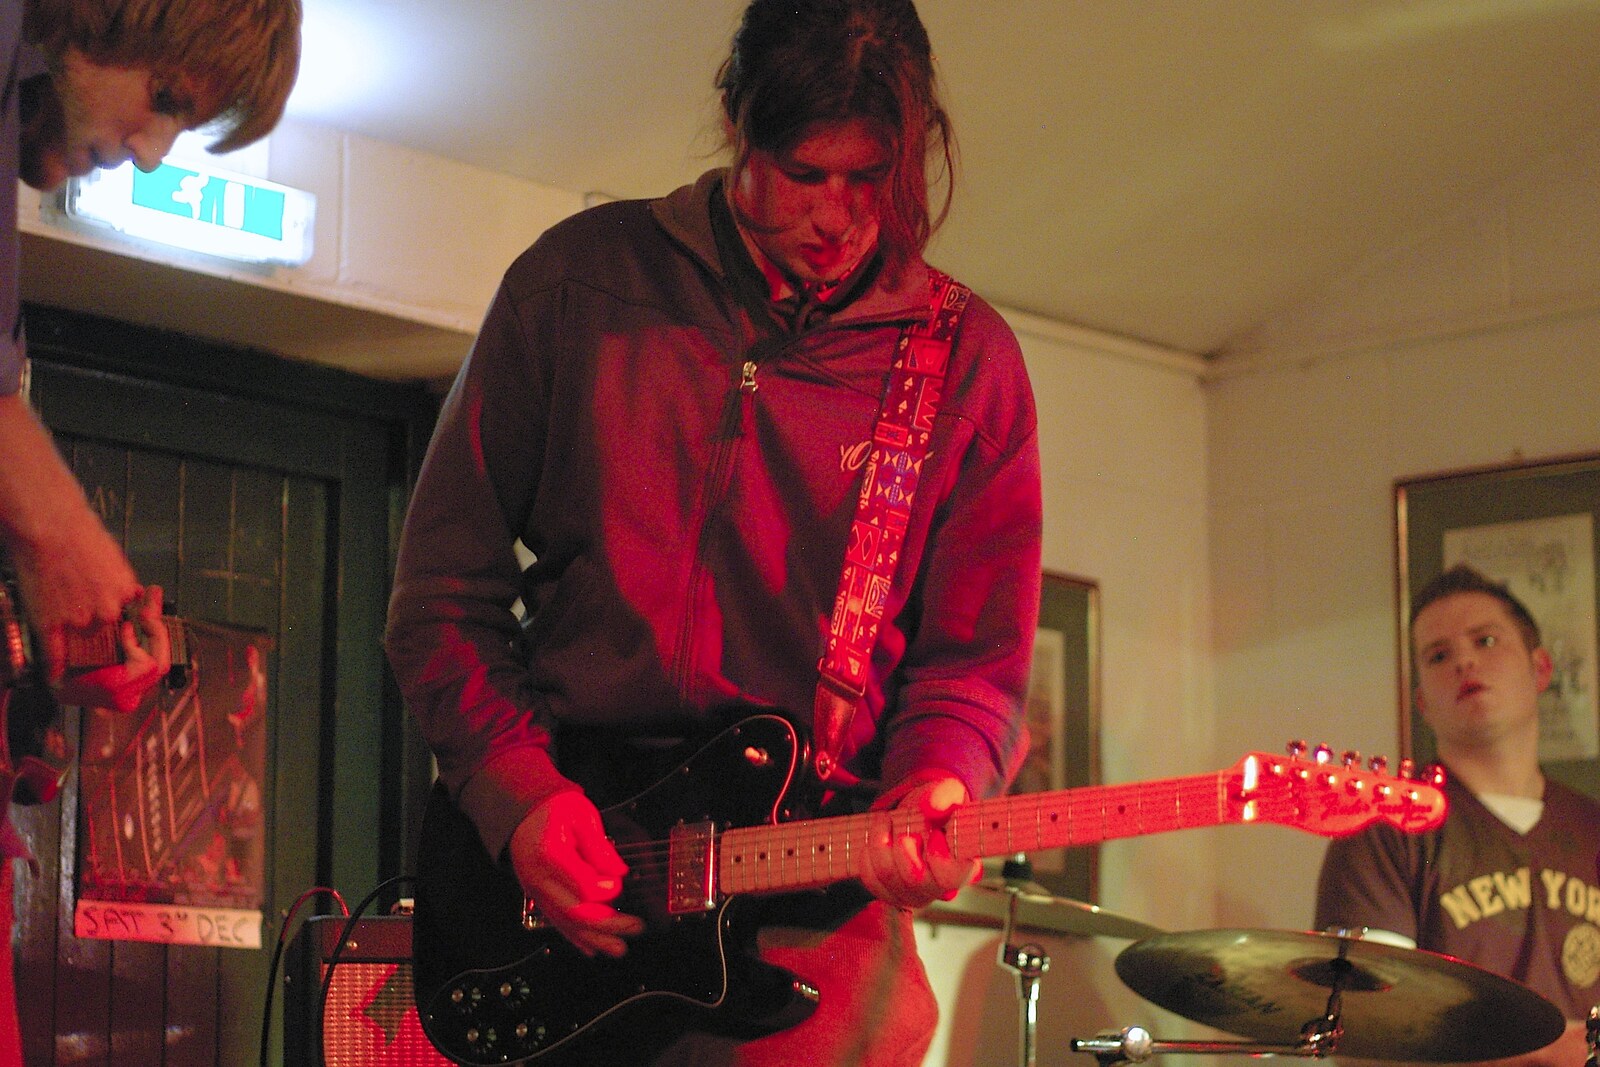 Paz shreds up a guitar from The Destruction of Padley's, and Alex Hill at the Barrel, Diss and Banham - 12th November 2005